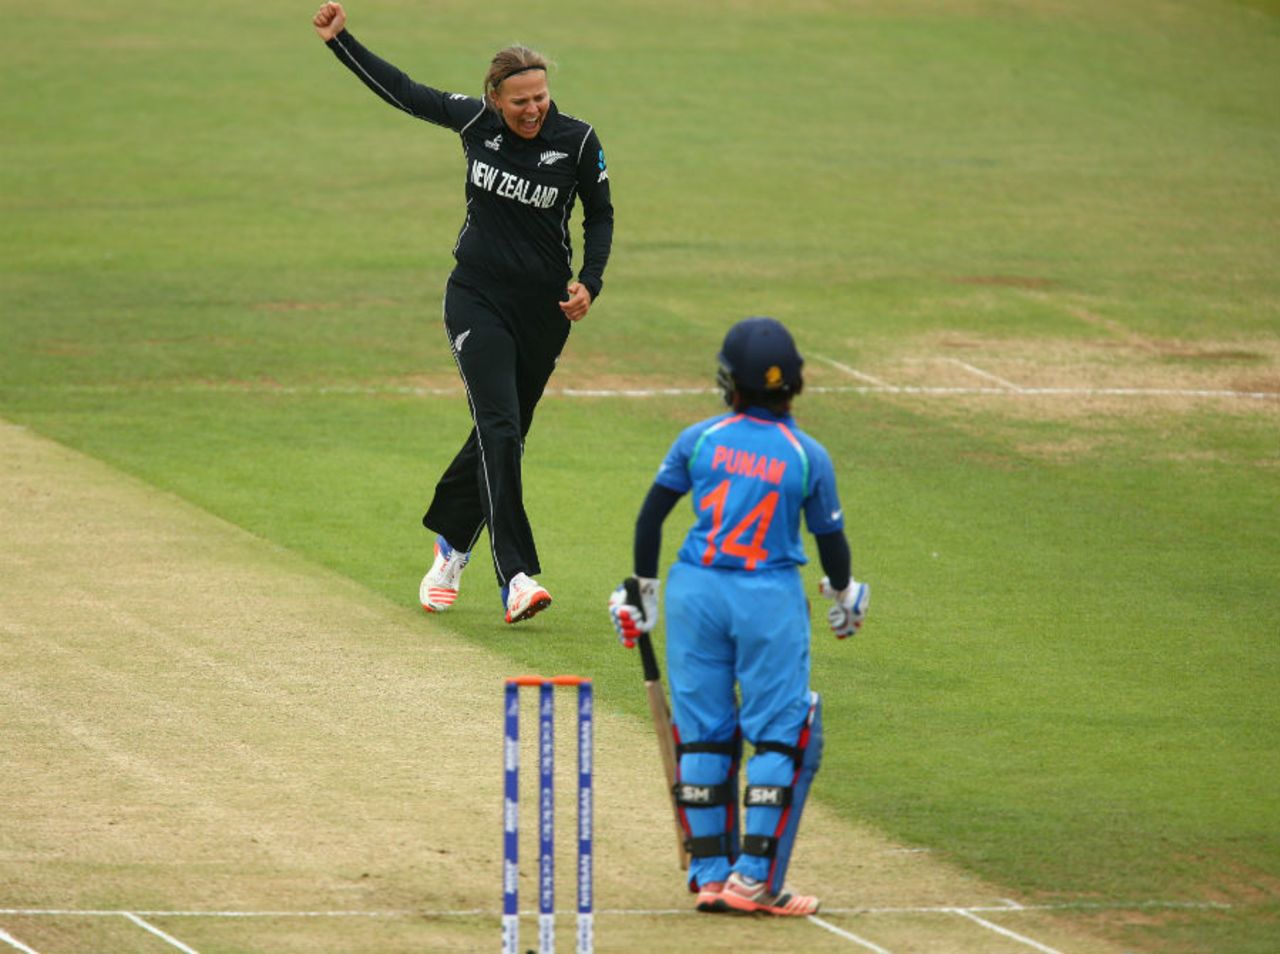 Punam Raut, who made a century in the previous game, fell cheaply, India v New Zealand, Women's World Cup, July 15, 2017